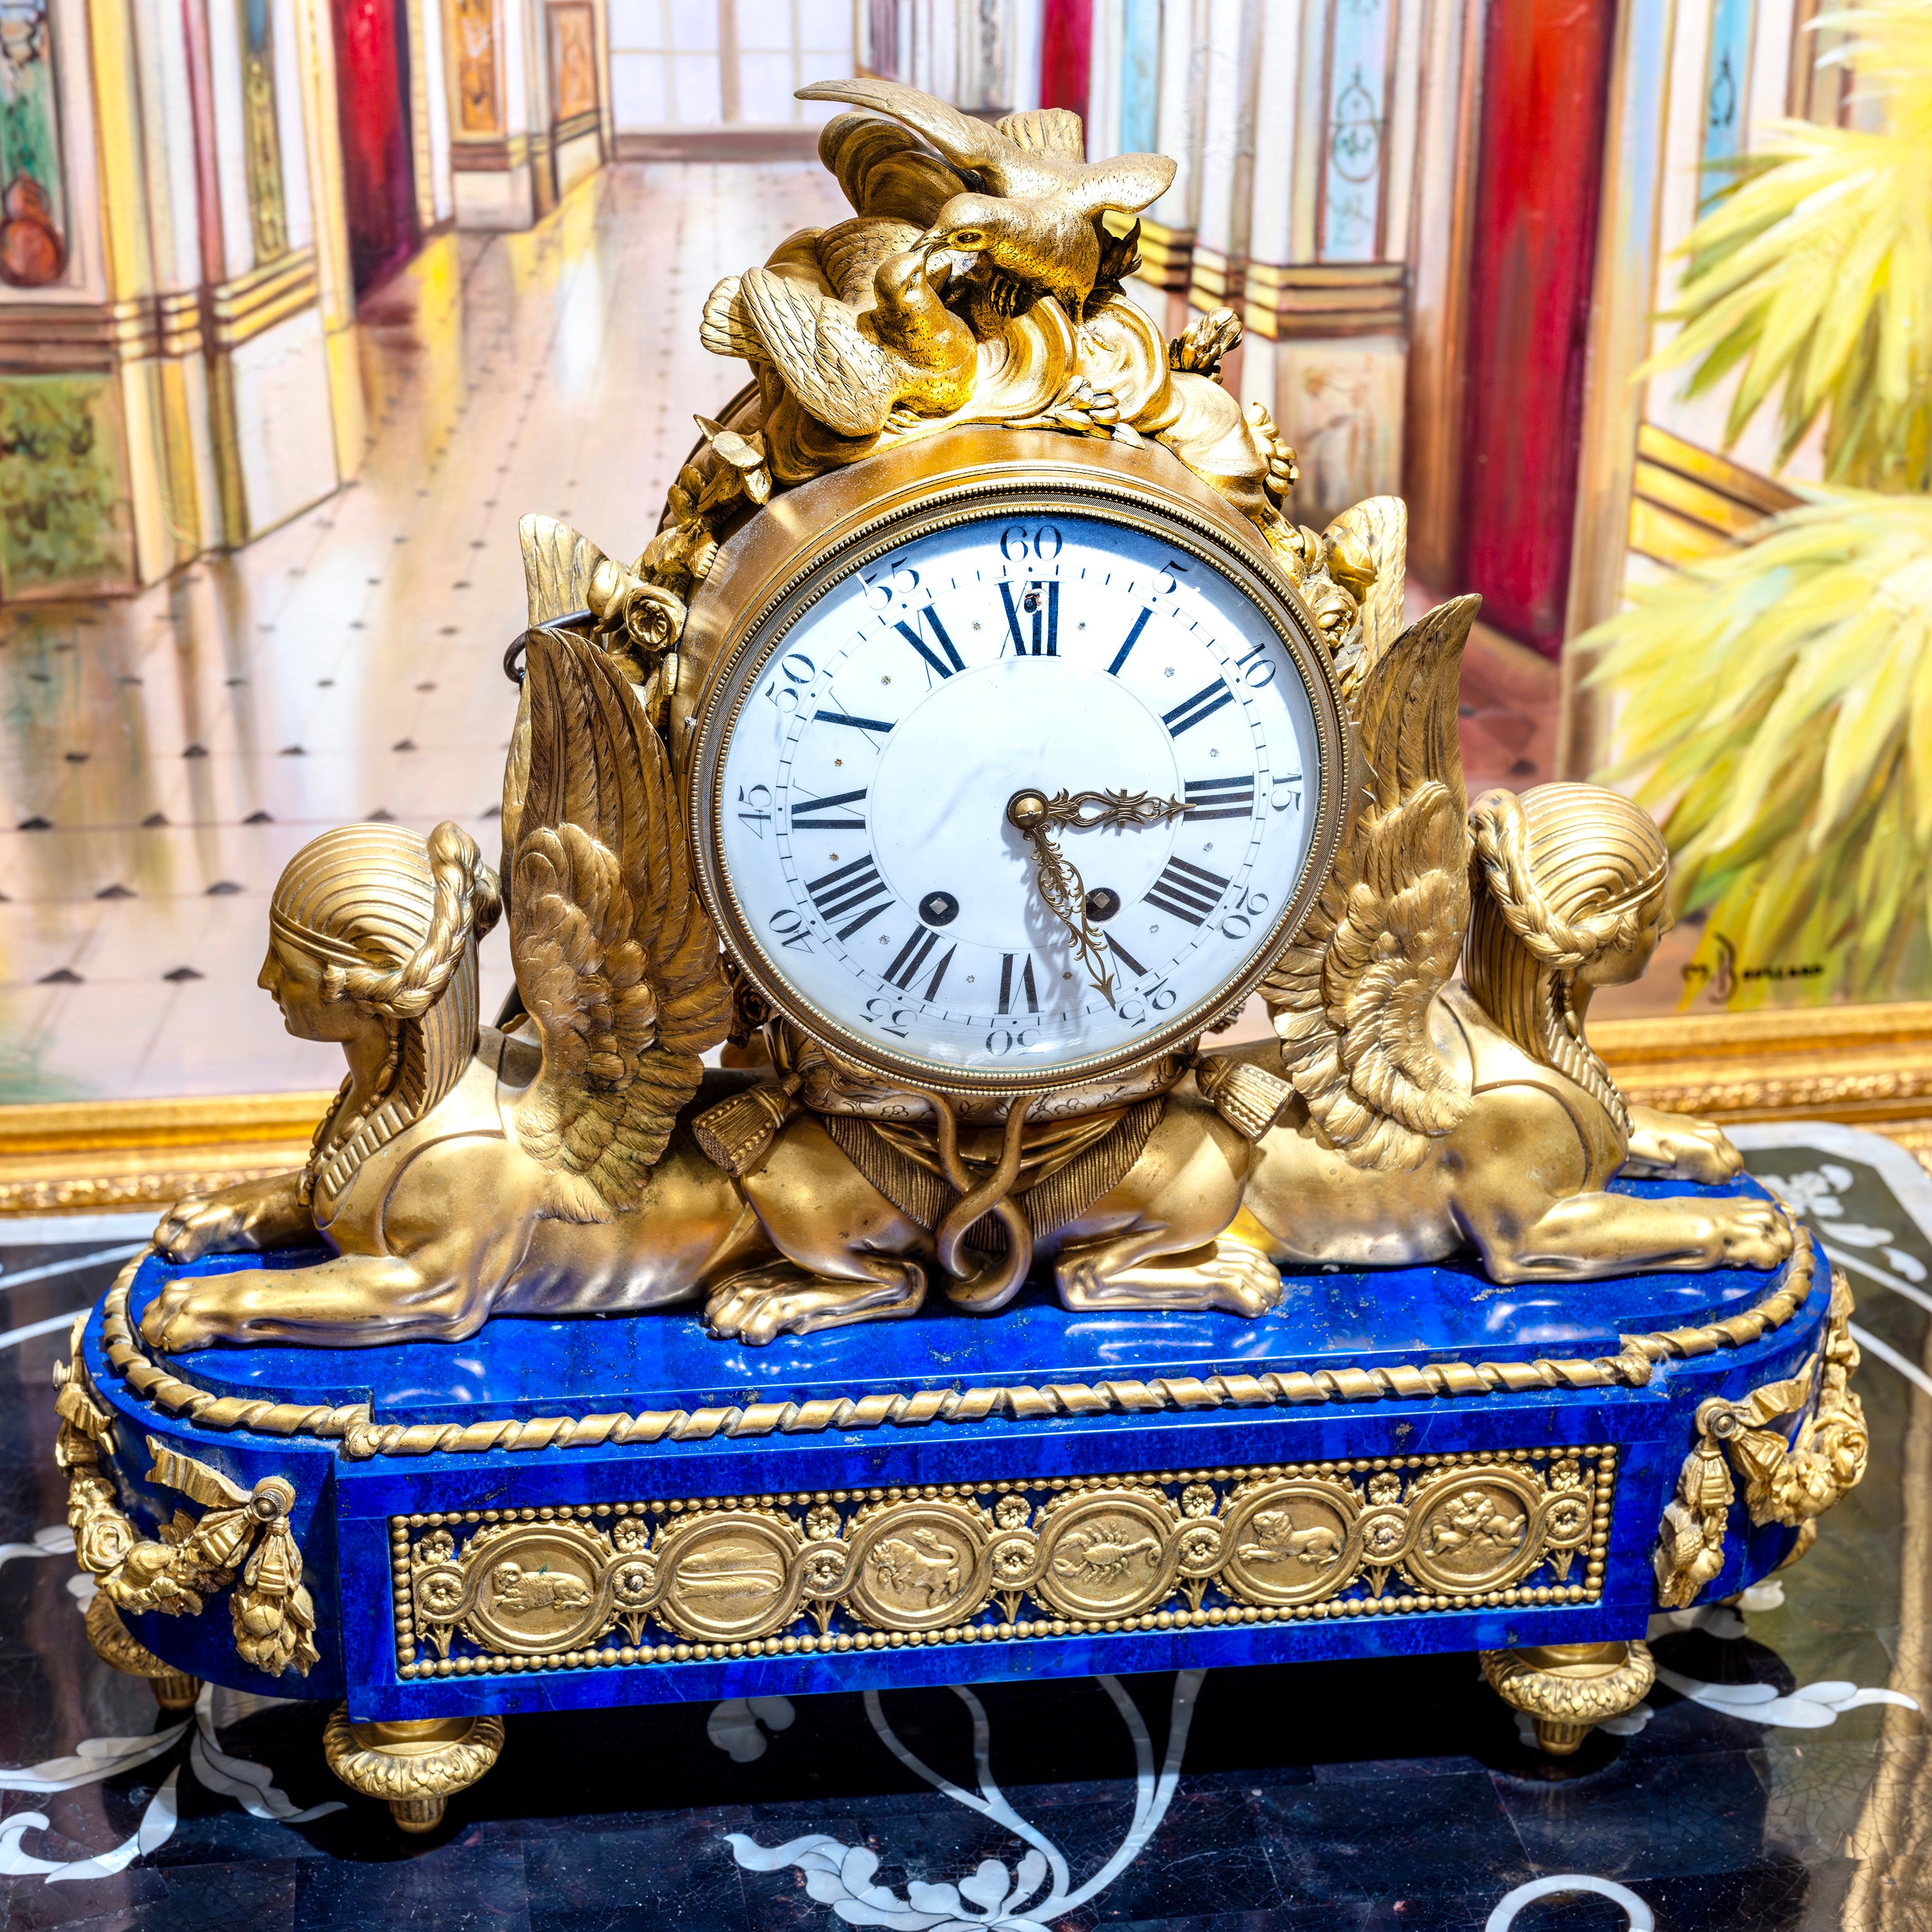 19th century French mantle clock with bronze winged figures